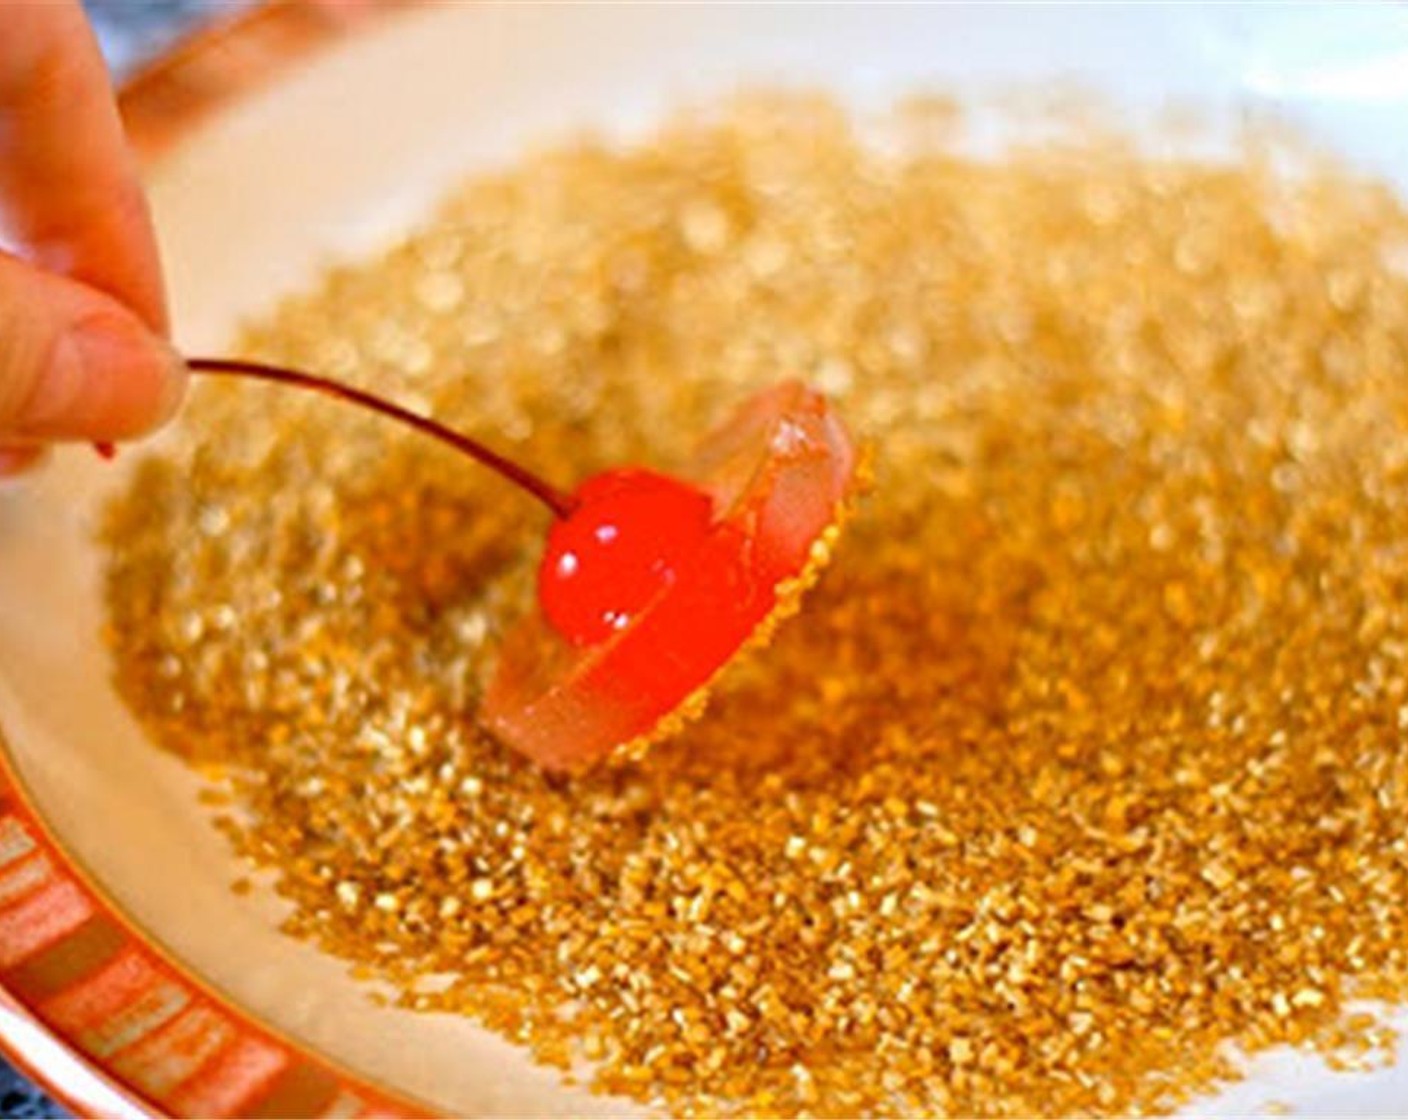 step 6 To dislodge, you might need to gently run a butter knife around the edges of each jello shot. Spread gold sprinkles on a plate and dip/roll each shot in sprinkles.